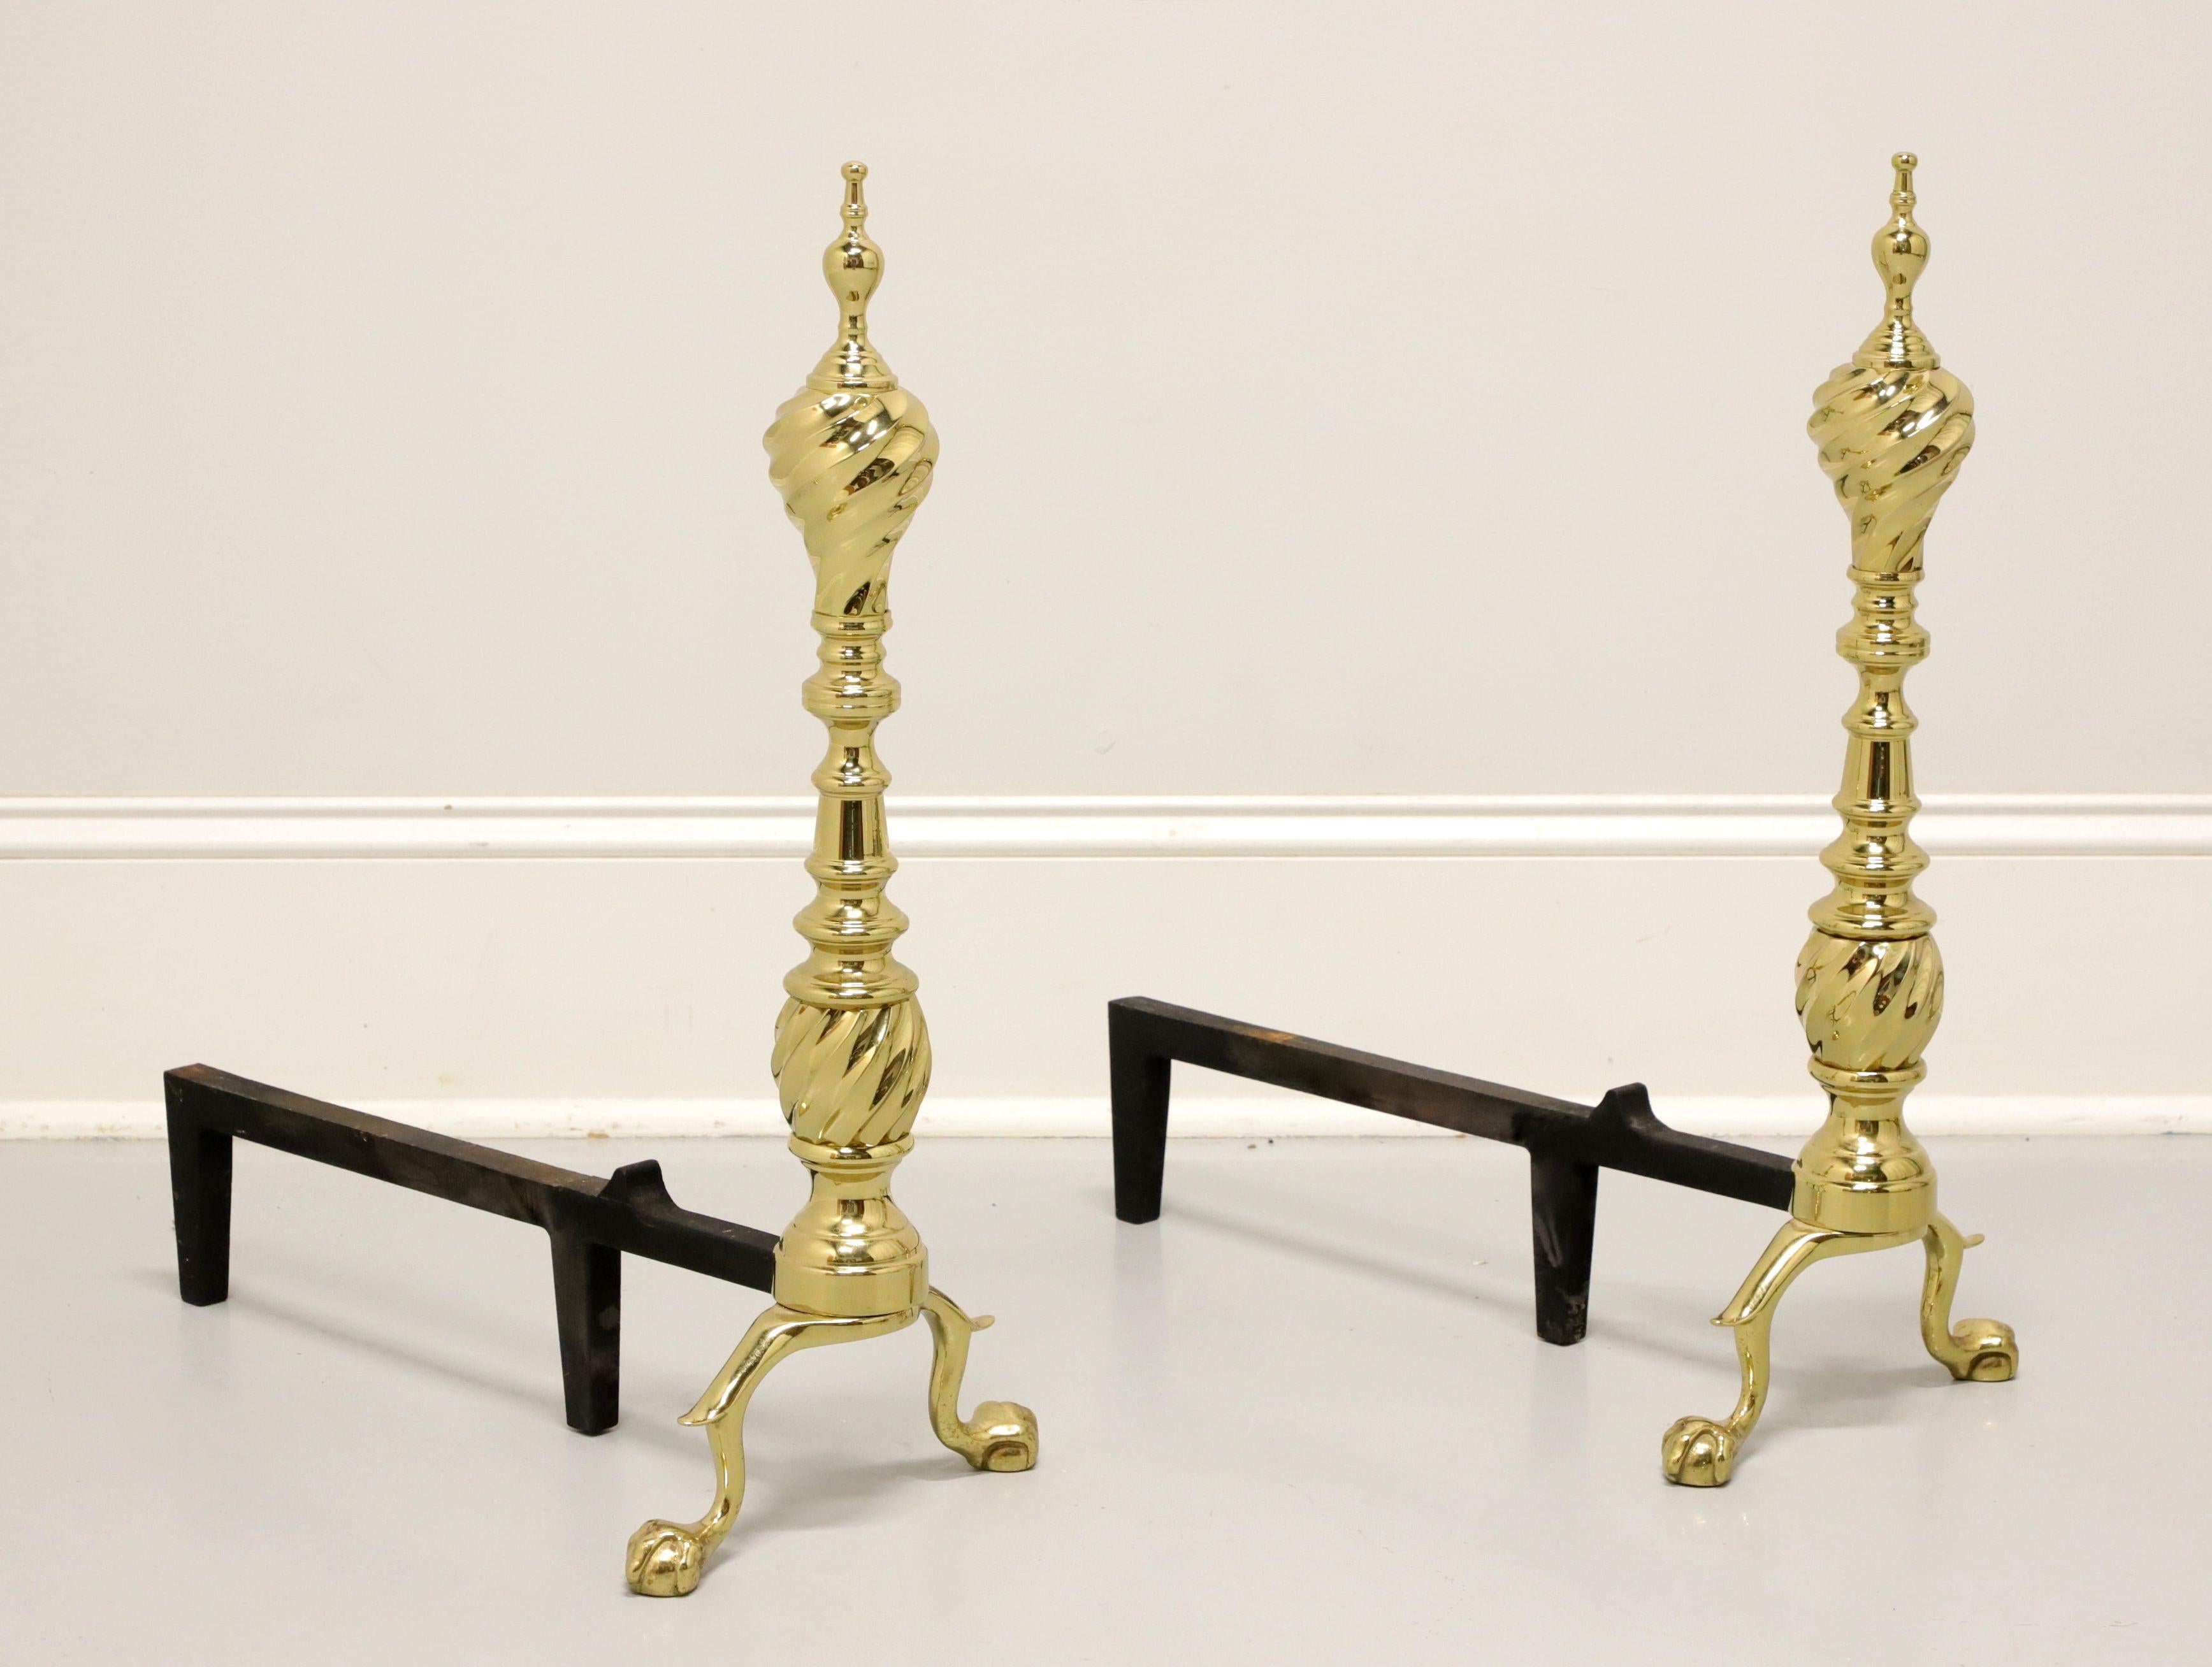 VIRGINIA METALCRAFTERS Middleton House Brass & Metal Fireplace Andirons - A For Sale 5